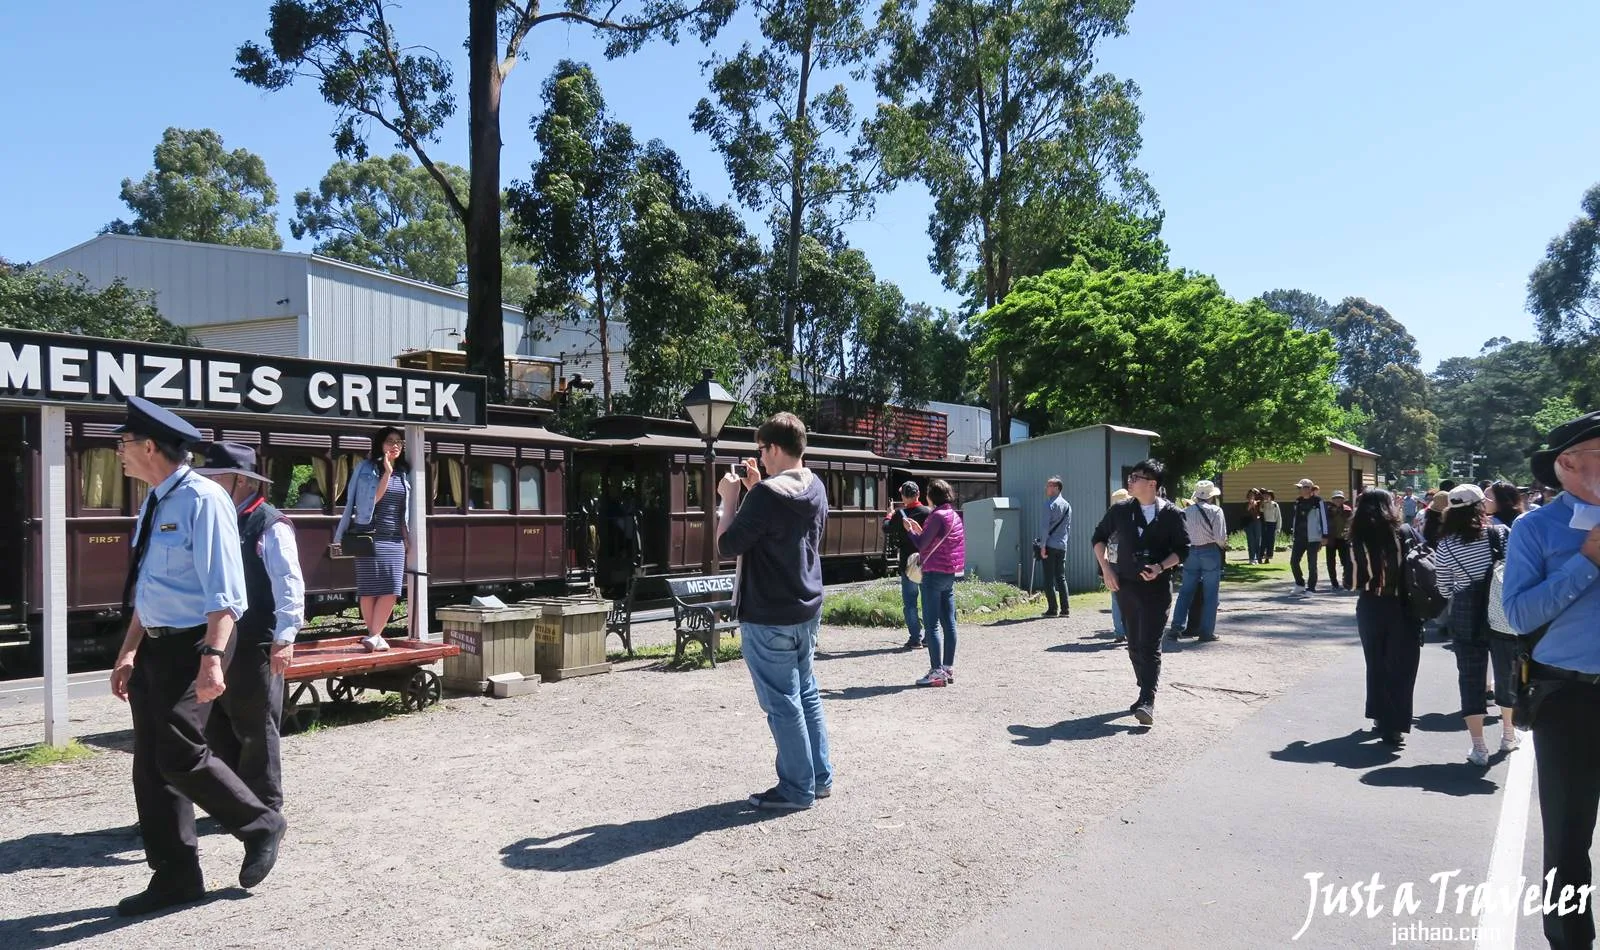 Melbourne-Puffing-Billy-Railway-steam-trains-tickets-prices-tour-timetable-map-lakeside-station